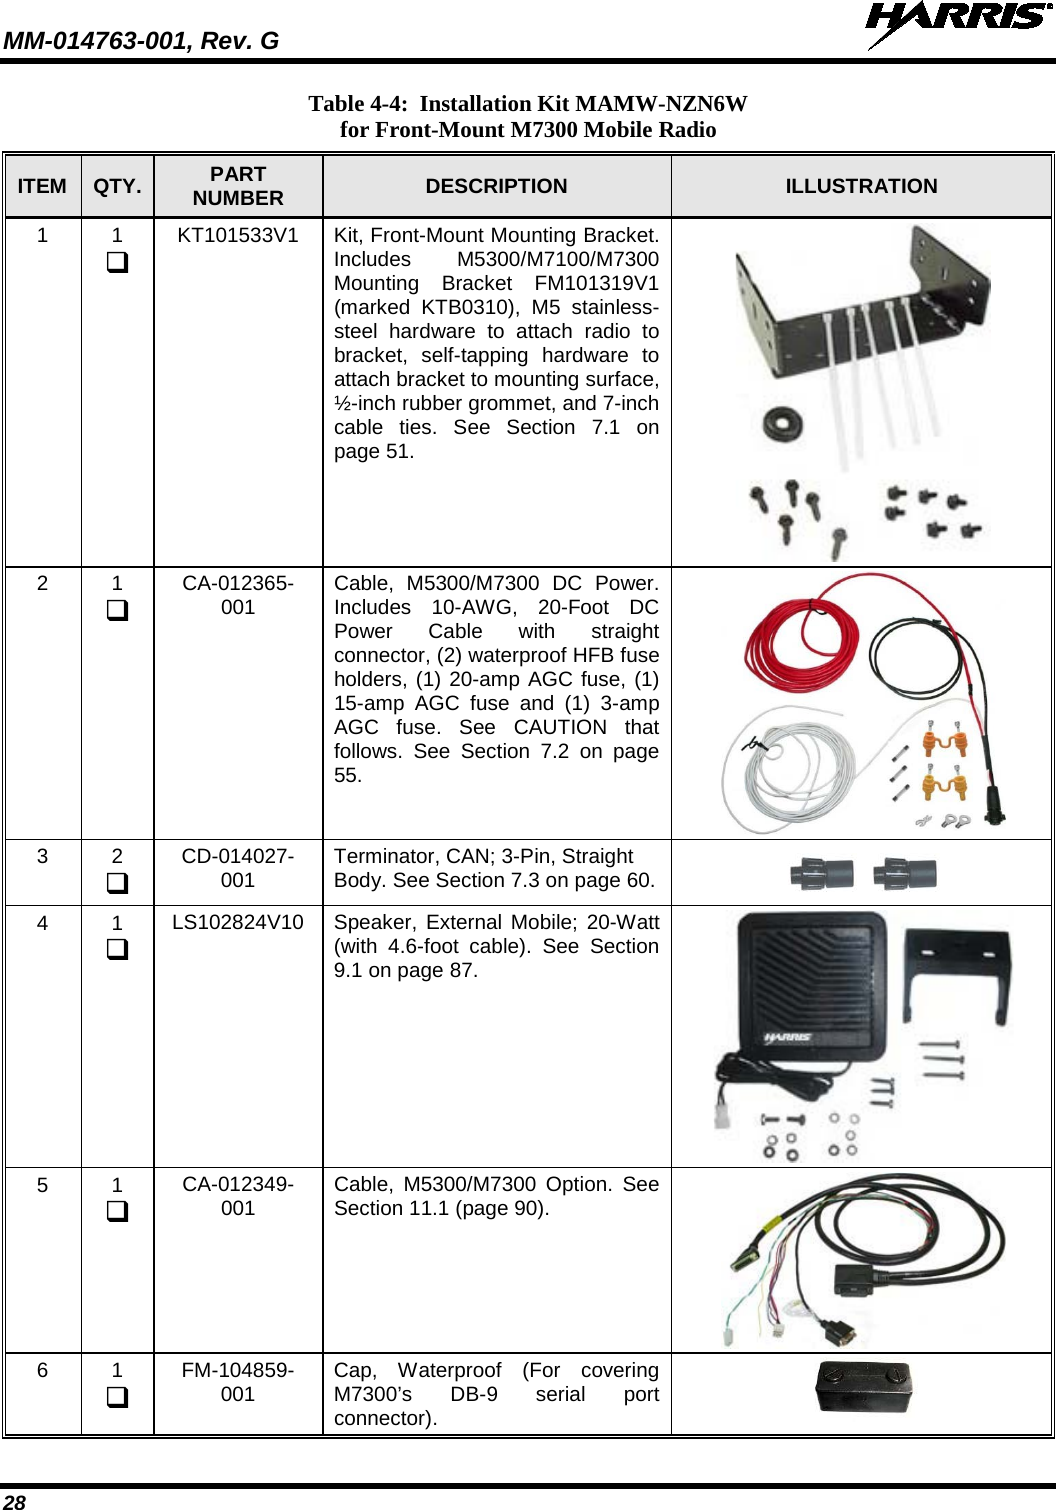 MM-014763-001, Rev. G   28 Table 4-4:  Installation Kit MAMW-NZN6W for Front-Mount M7300 Mobile Radio ITEM QTY. PART NUMBER DESCRIPTION ILLUSTRATION 1  1  KT101533V1 Kit, Front-Mount Mounting Bracket. Includes  M5300/M7100/M7300 Mounting Bracket FM101319V1 (marked KTB0310), M5 stainless-steel hardware to attach radio to bracket, self-tapping hardware to attach bracket to mounting surface, ½-inch rubber grommet, and 7-inch cable ties. See Section 7.1 on page 51.  2  1  CA-012365-001 Cable,  M5300/M7300 DC Power. Includes 10-AWG, 20-Foot DC Power Cable with straight connector, (2) waterproof HFB fuse holders, (1) 20-amp AGC fuse, (1) 15-amp AGC fuse and (1) 3-amp AGC fuse. See CAUTION that follows. See Section 7.2 on page 55.  3  2  CD-014027-001 Terminator, CAN; 3-Pin, Straight Body. See Section 7.3 on page 60.       4  1  LS102824V10 Speaker, External Mobile; 20-Watt (with 4.6-foot cable).  See Section 9.1 on page 87.  5  1  CA-012349-001 Cable, M5300/M7300 Option. See Section 11.1 (page 90).  6  1  FM-104859-001 Cap, Waterproof (For covering M7300’s DB-9 serial port connector).    